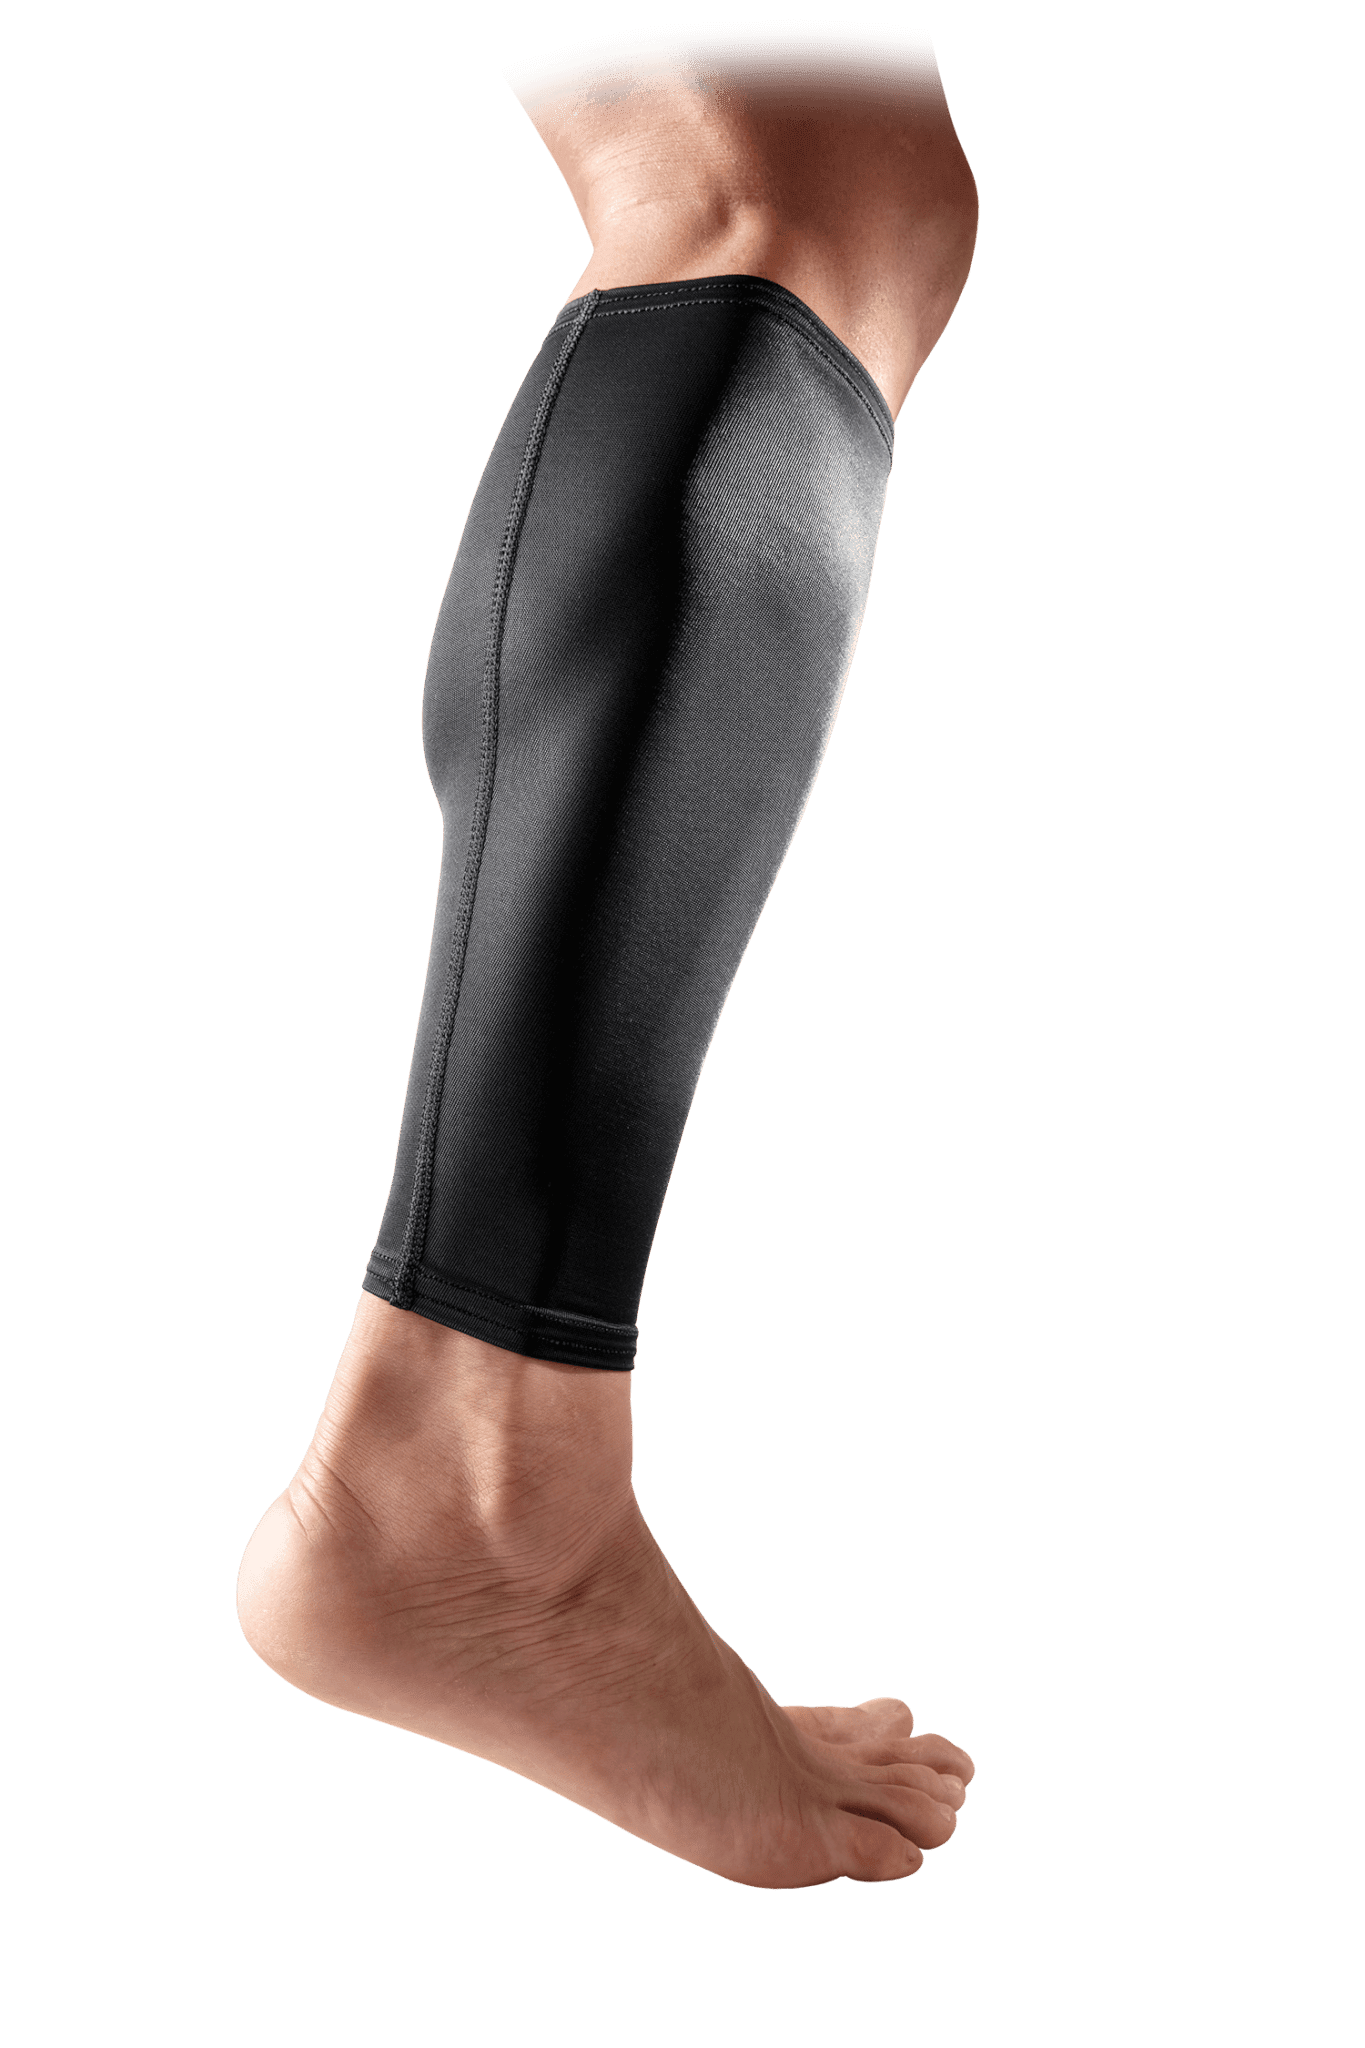 Bottoms Calf Compression Sleeves